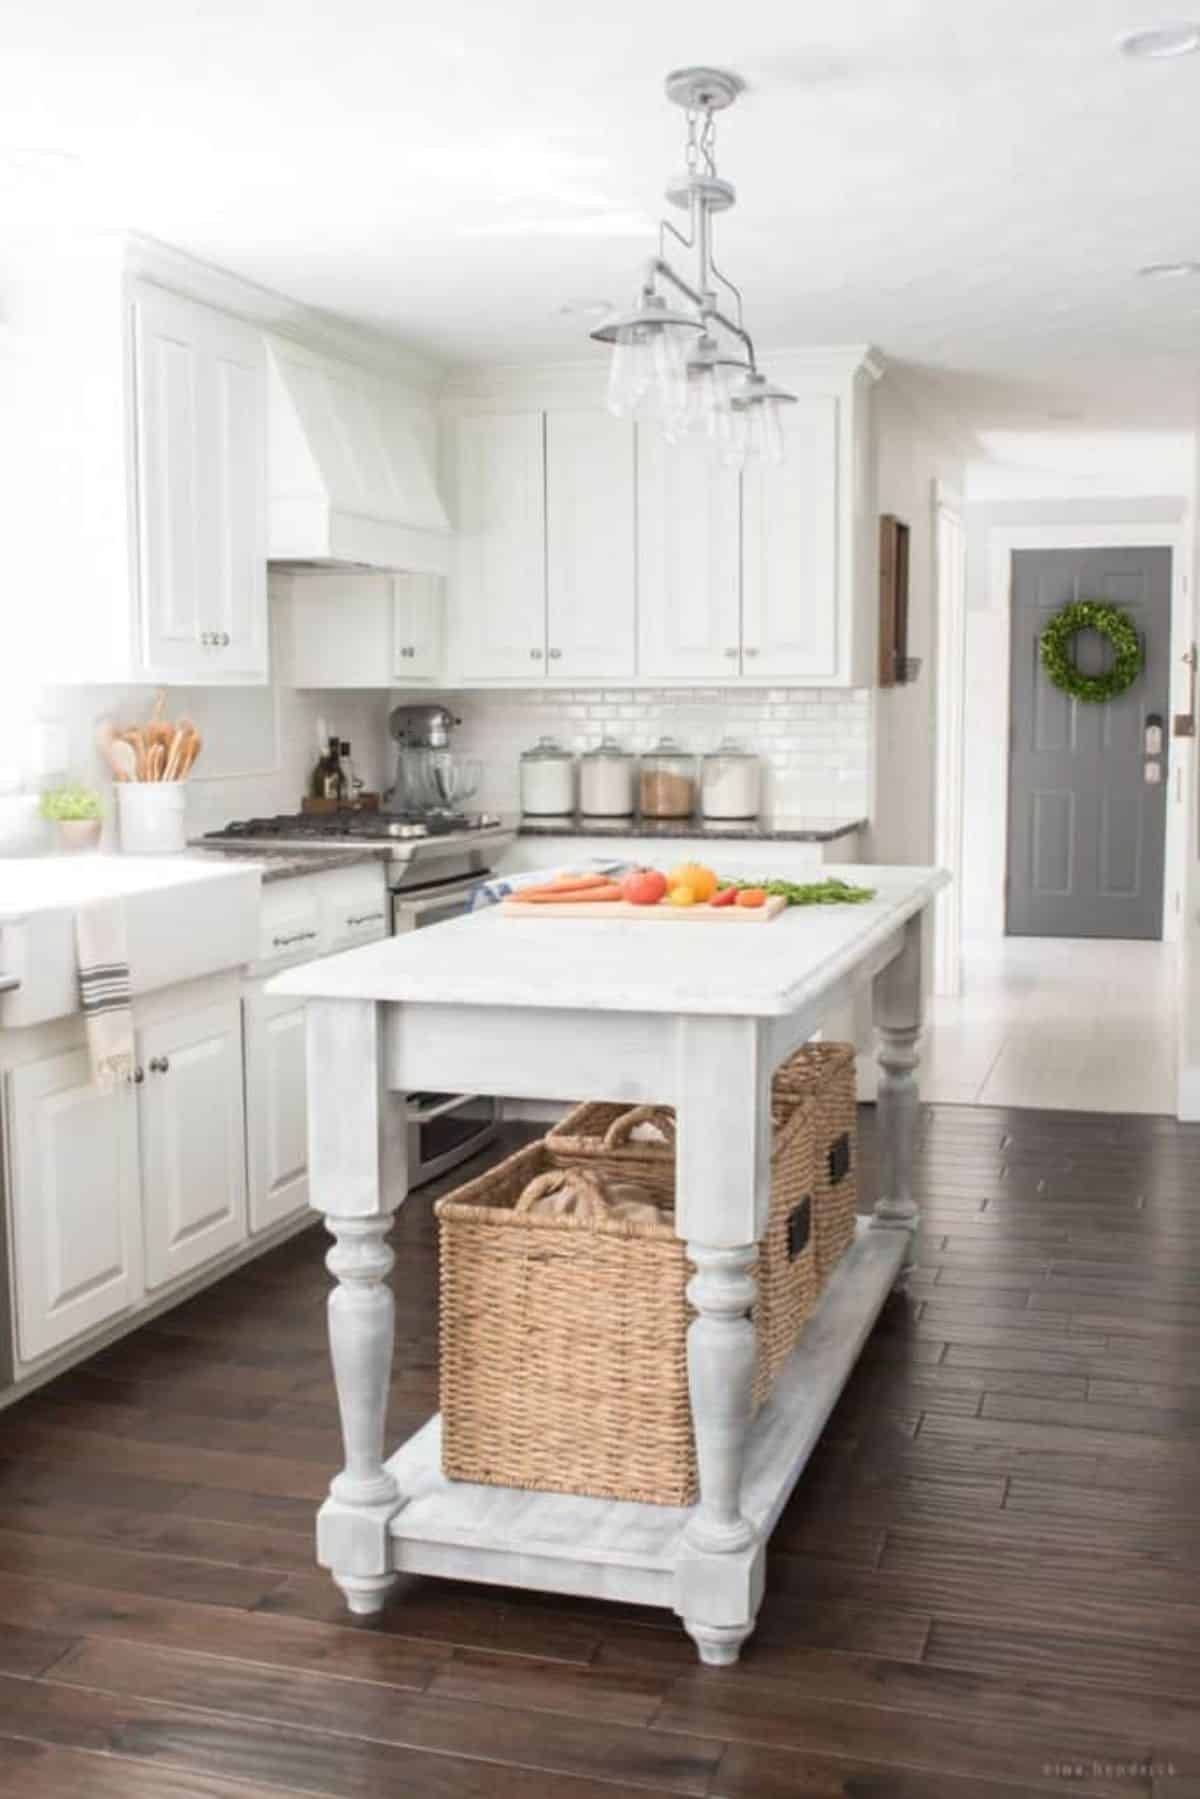 Add More Space with a Kitchen Island